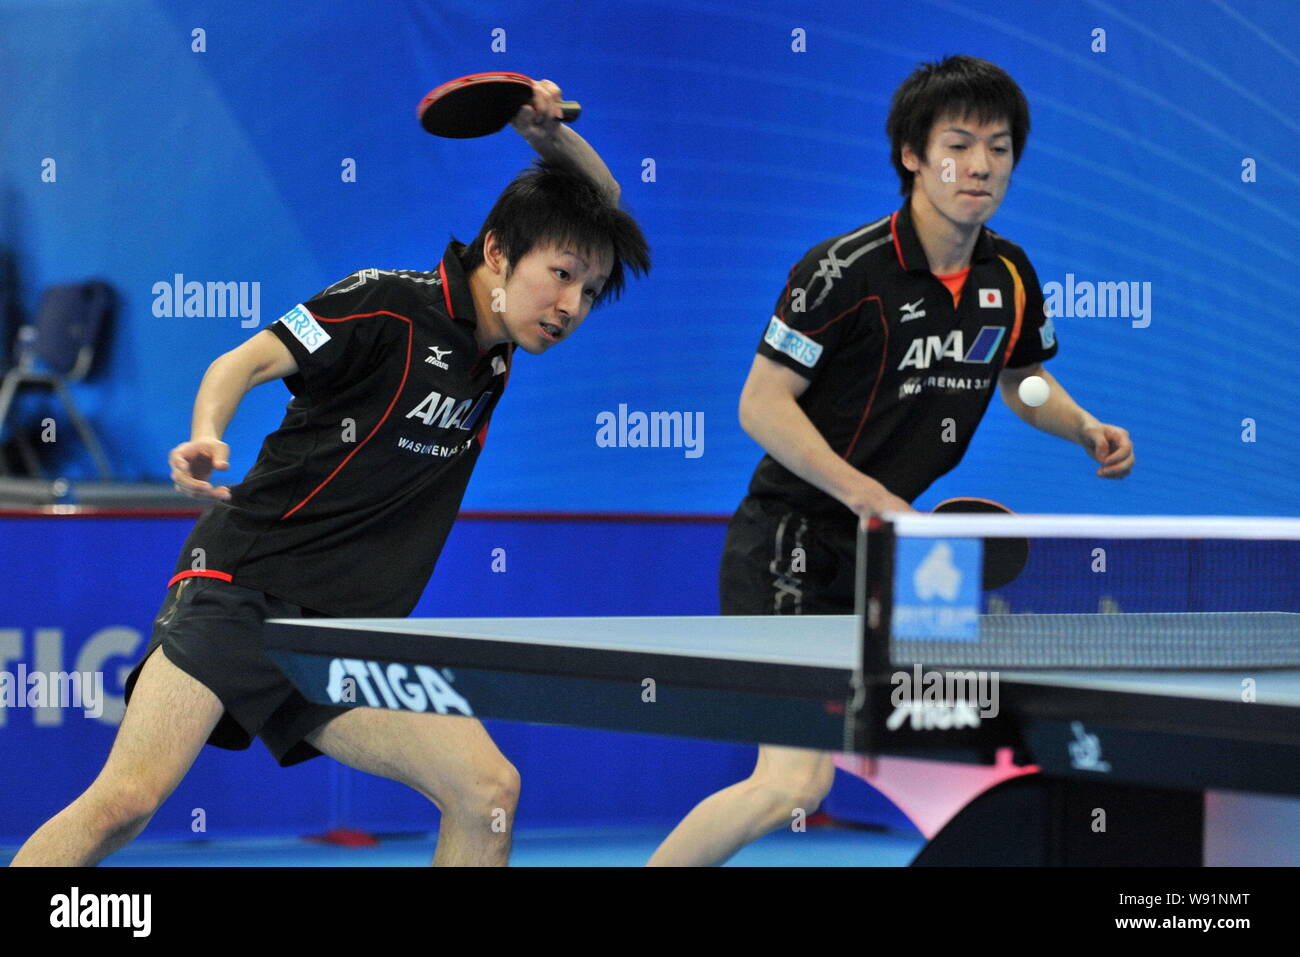 Koki Niwa, left, and Kenta Matsudaira of Japan compete against their Australian counterparts in their mens doubles event during the first round of the Stock Photo